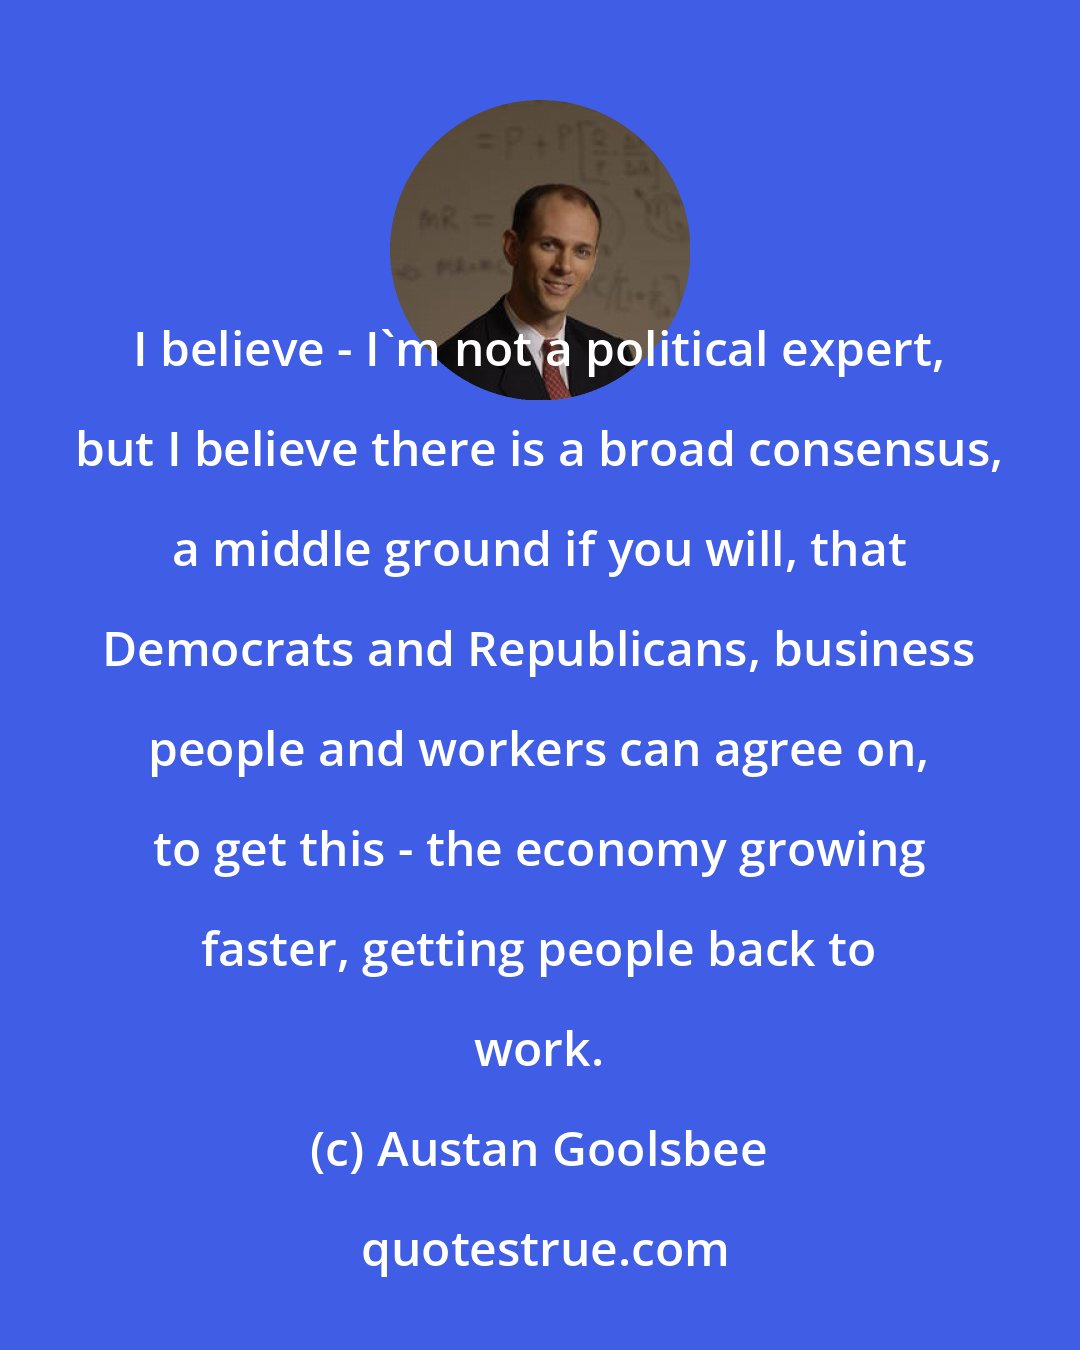 Austan Goolsbee: I believe - I'm not a political expert, but I believe there is a broad consensus, a middle ground if you will, that Democrats and Republicans, business people and workers can agree on, to get this - the economy growing faster, getting people back to work.